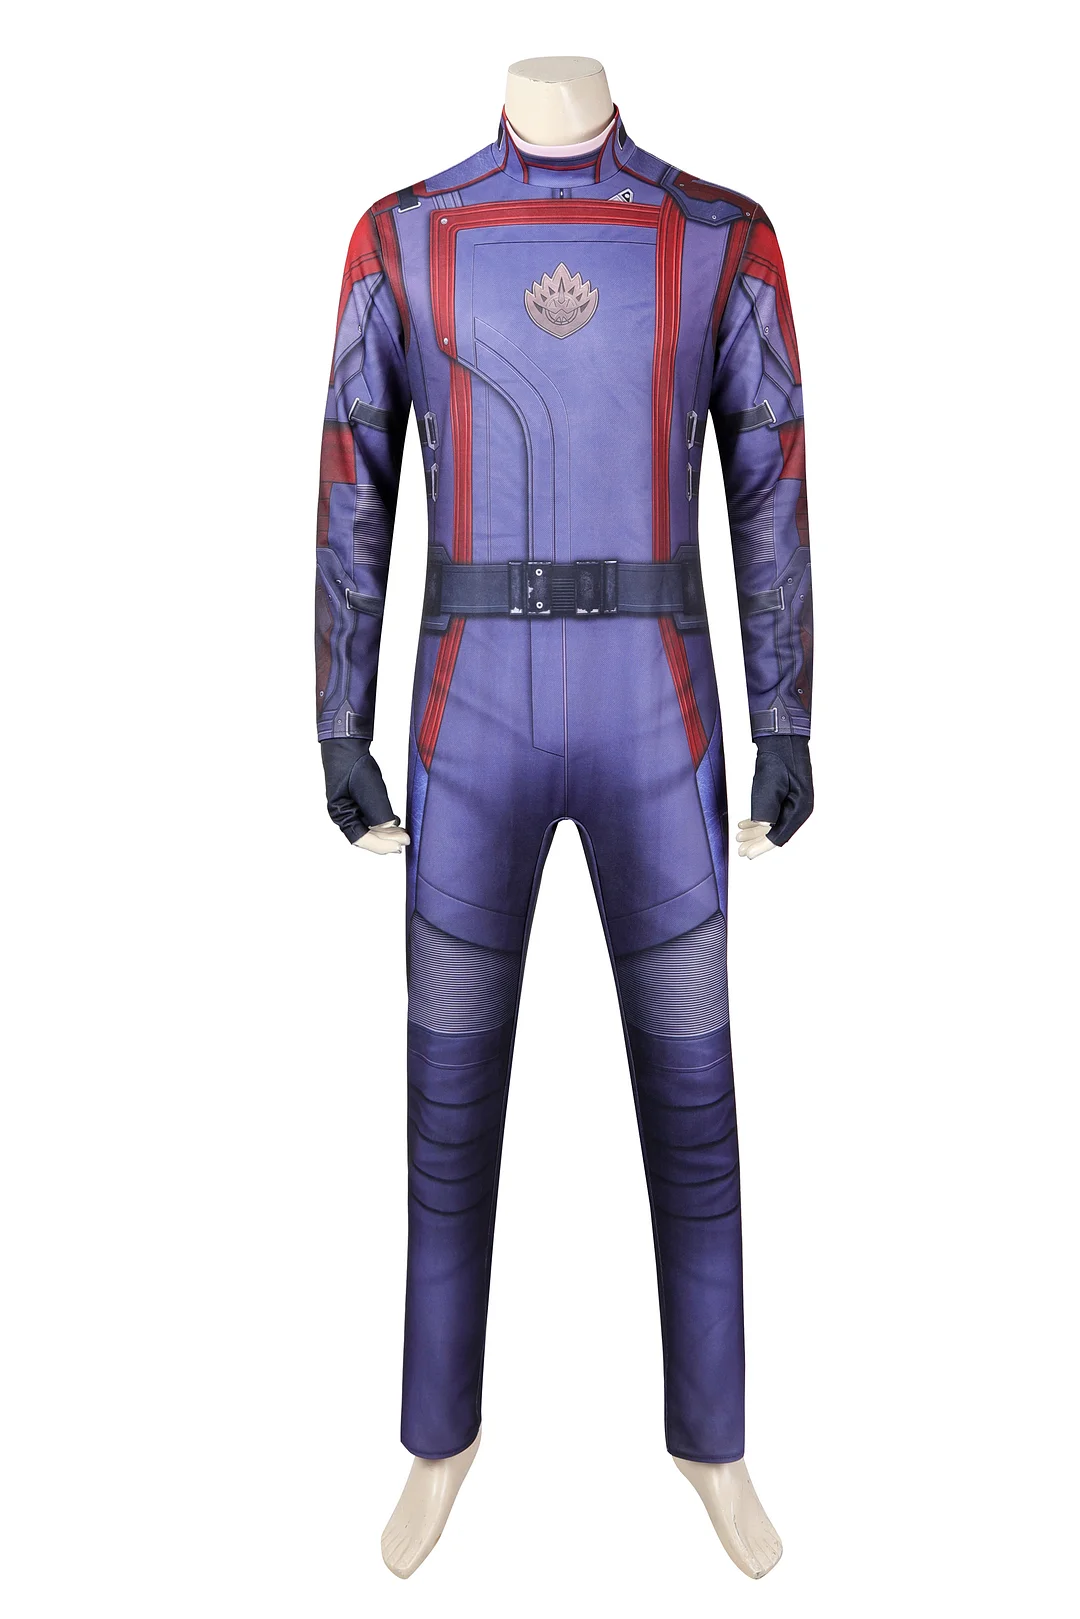 Guardians of The Galaxy 3 Star Lord Costume Peter Quill Halloween Cosplay Jumpsuit